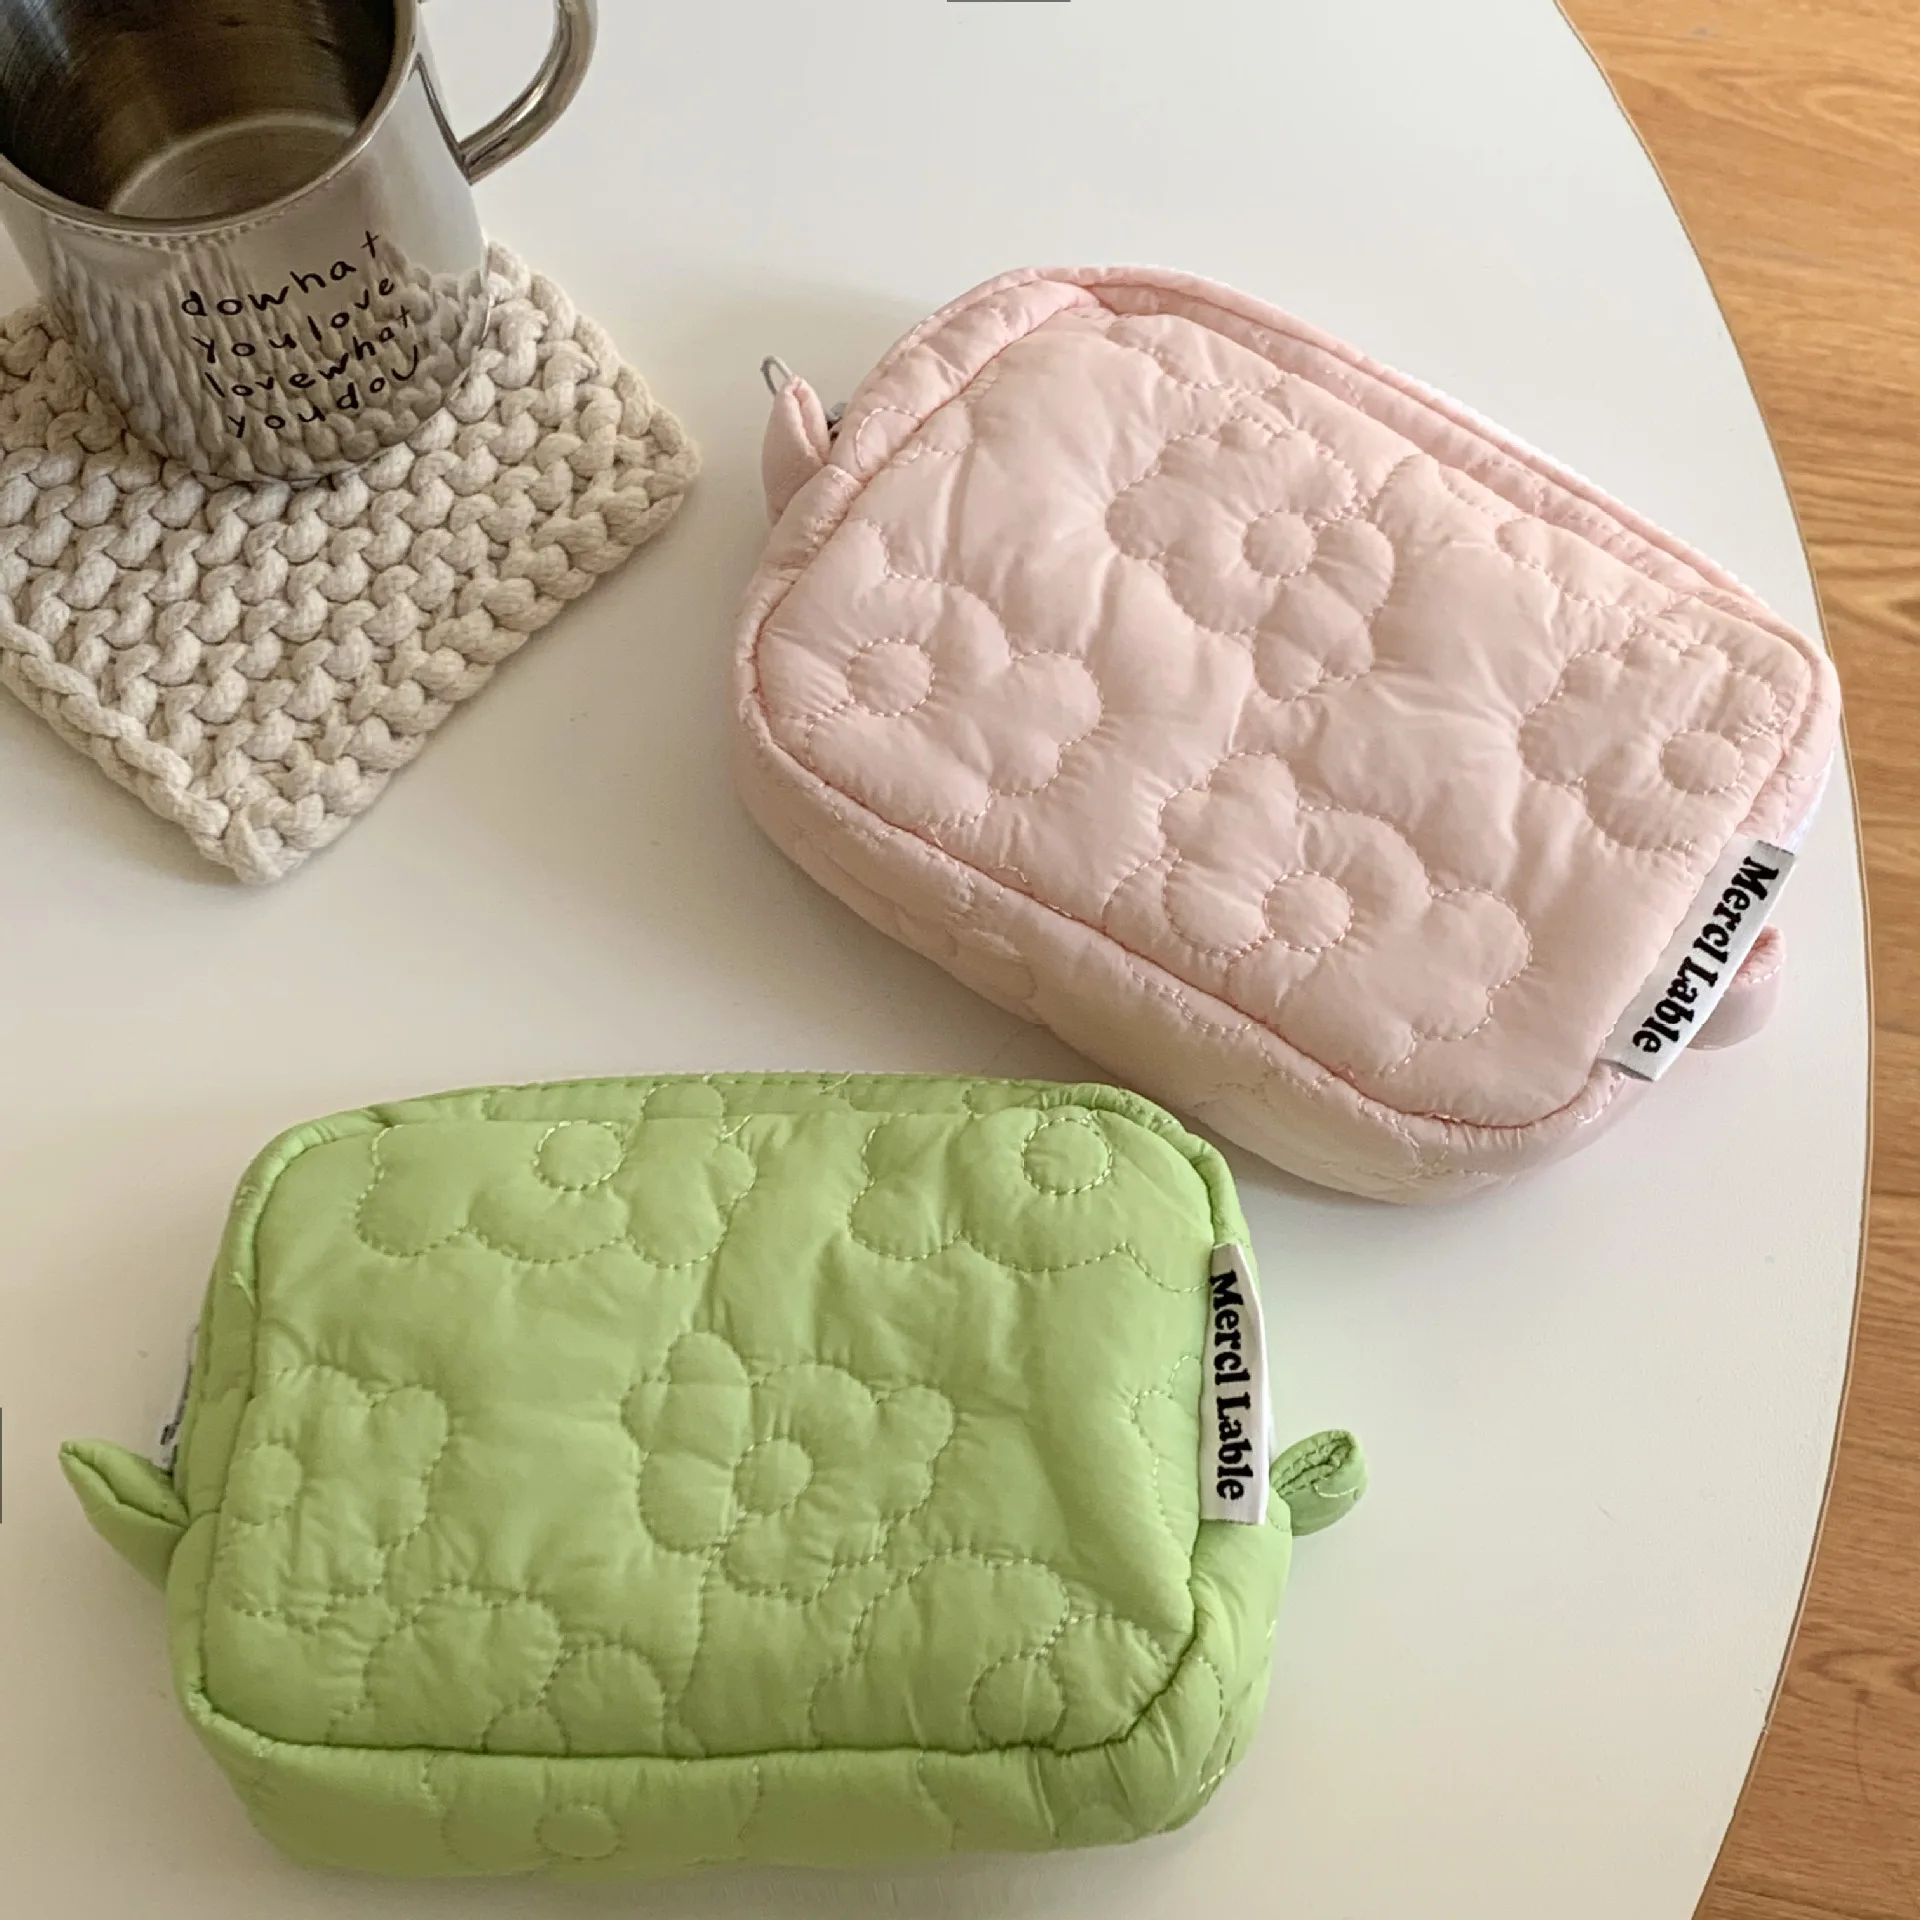 Cute Cosmetic Storage Bag Quilted Flowers Design Cosmetic Bag Soft Comfortable Makeup Bag for Lipstick Tissue Jewelry Pouch